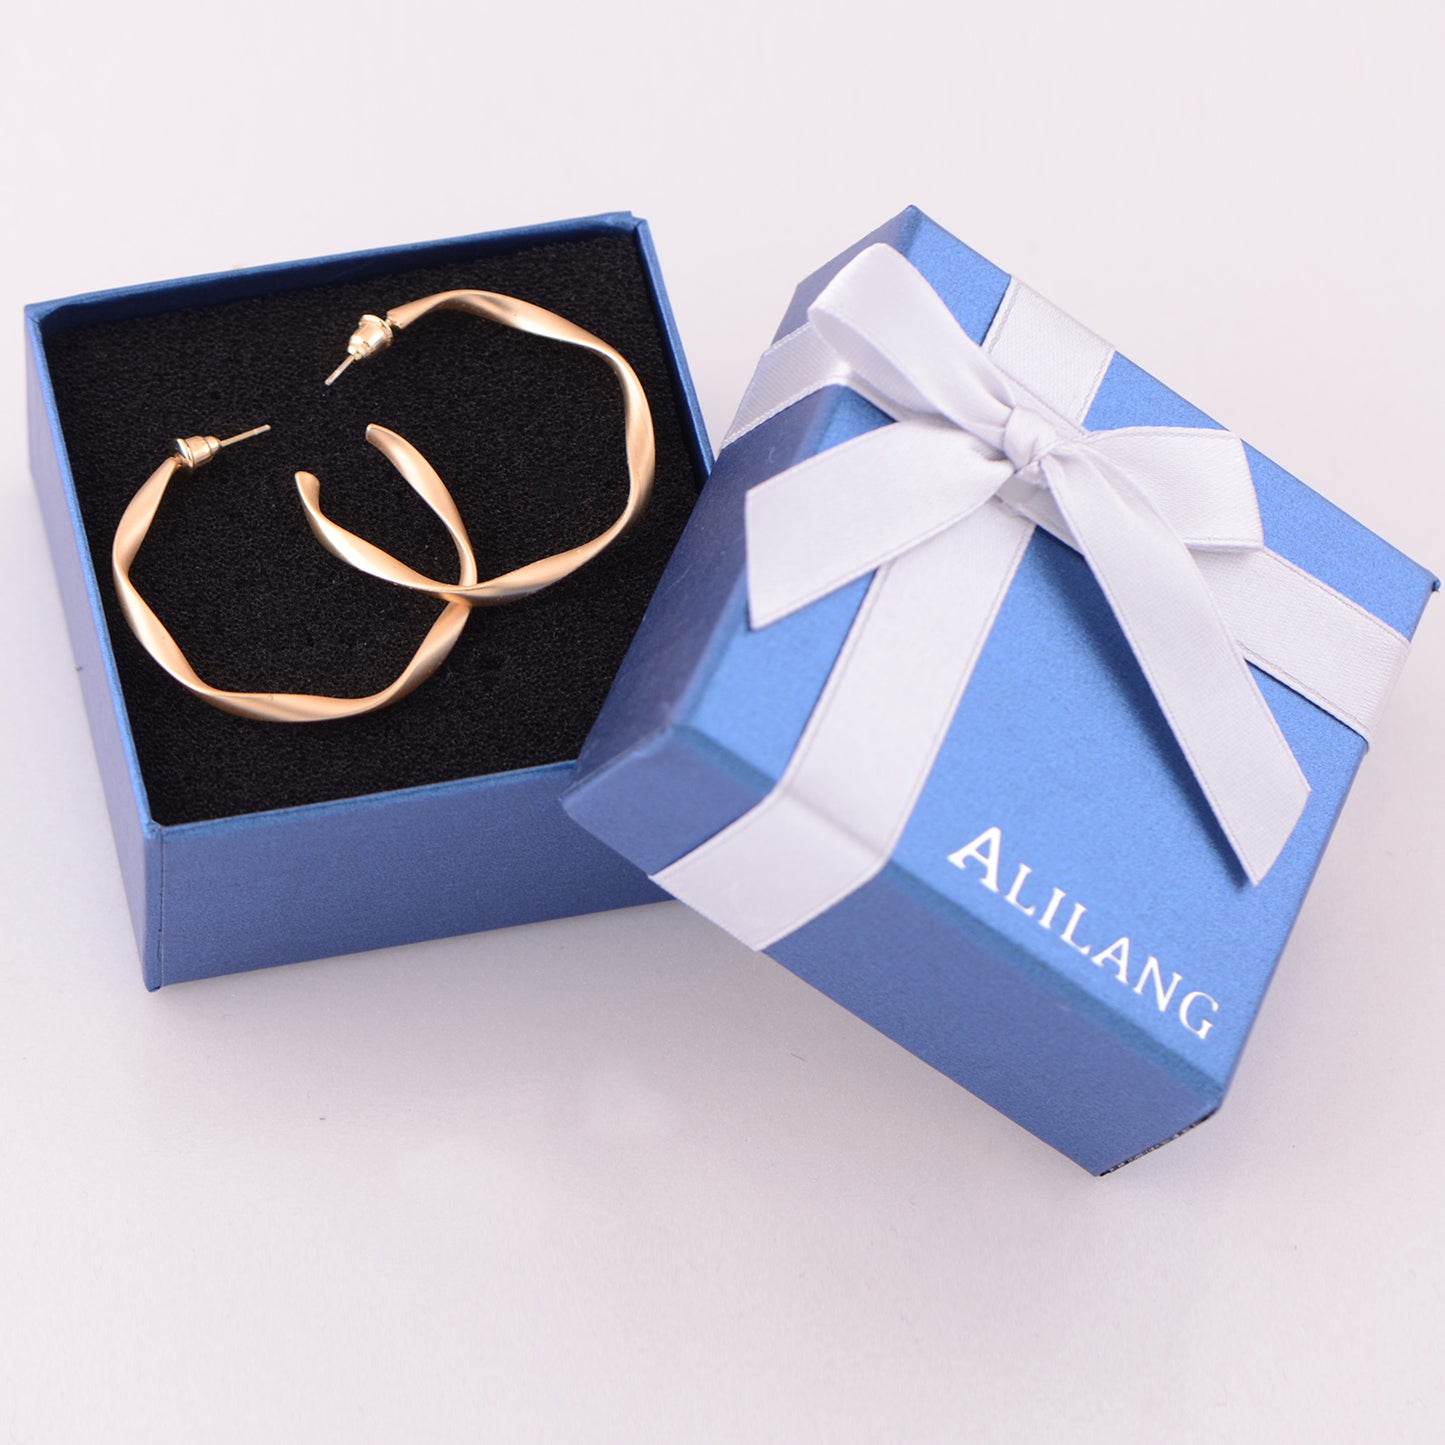 Alilang 14K Gold Plated Hoop Earrings for Womens Girls, Twisted Rope Round Earrings with 925 Sterling Silver Post for Sensitive Ears